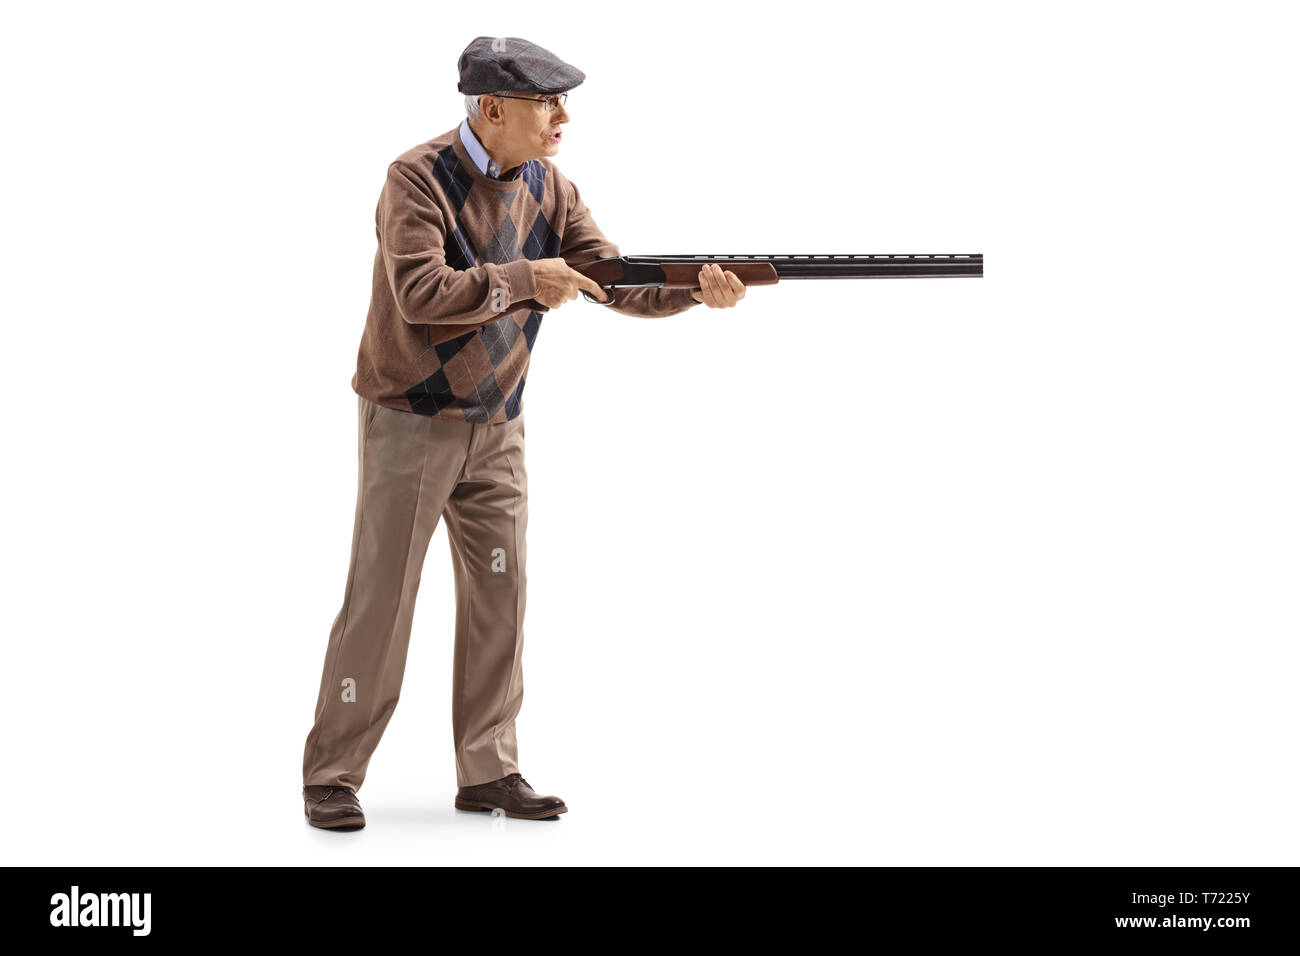 Full length profile shot of an elderly man aiming with a shotgun isolated on white background Stock Photo